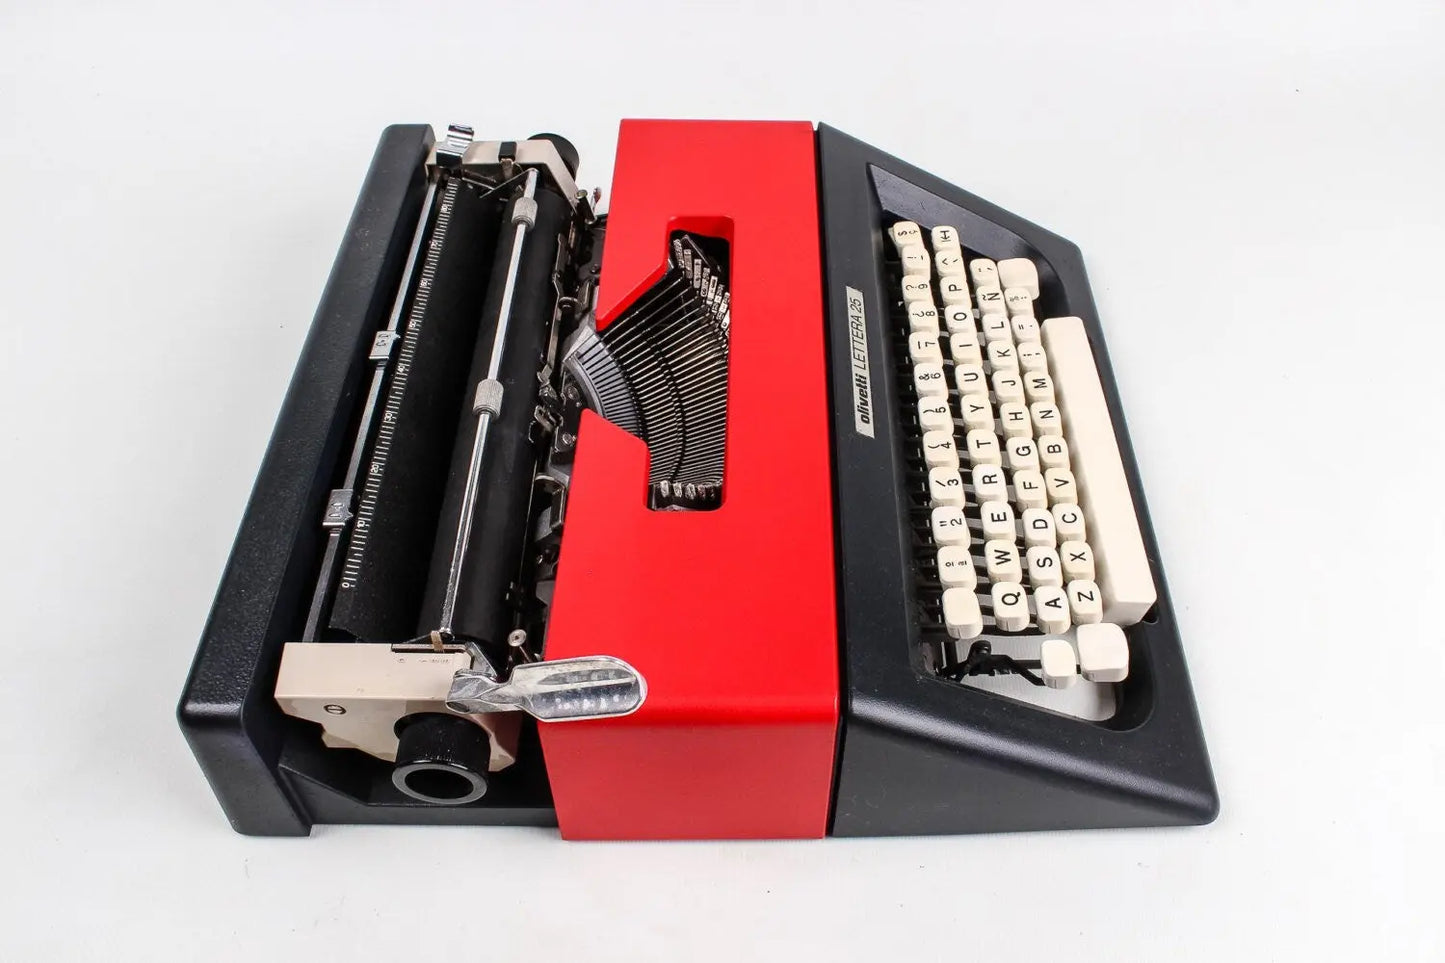 Olivetti Lettera 25 Red & Black Typewriter, Vintage, Mint Condition, Manual Portable, Professionally Serviced by Typewriter.Company - ElGranero Typewriter.Company